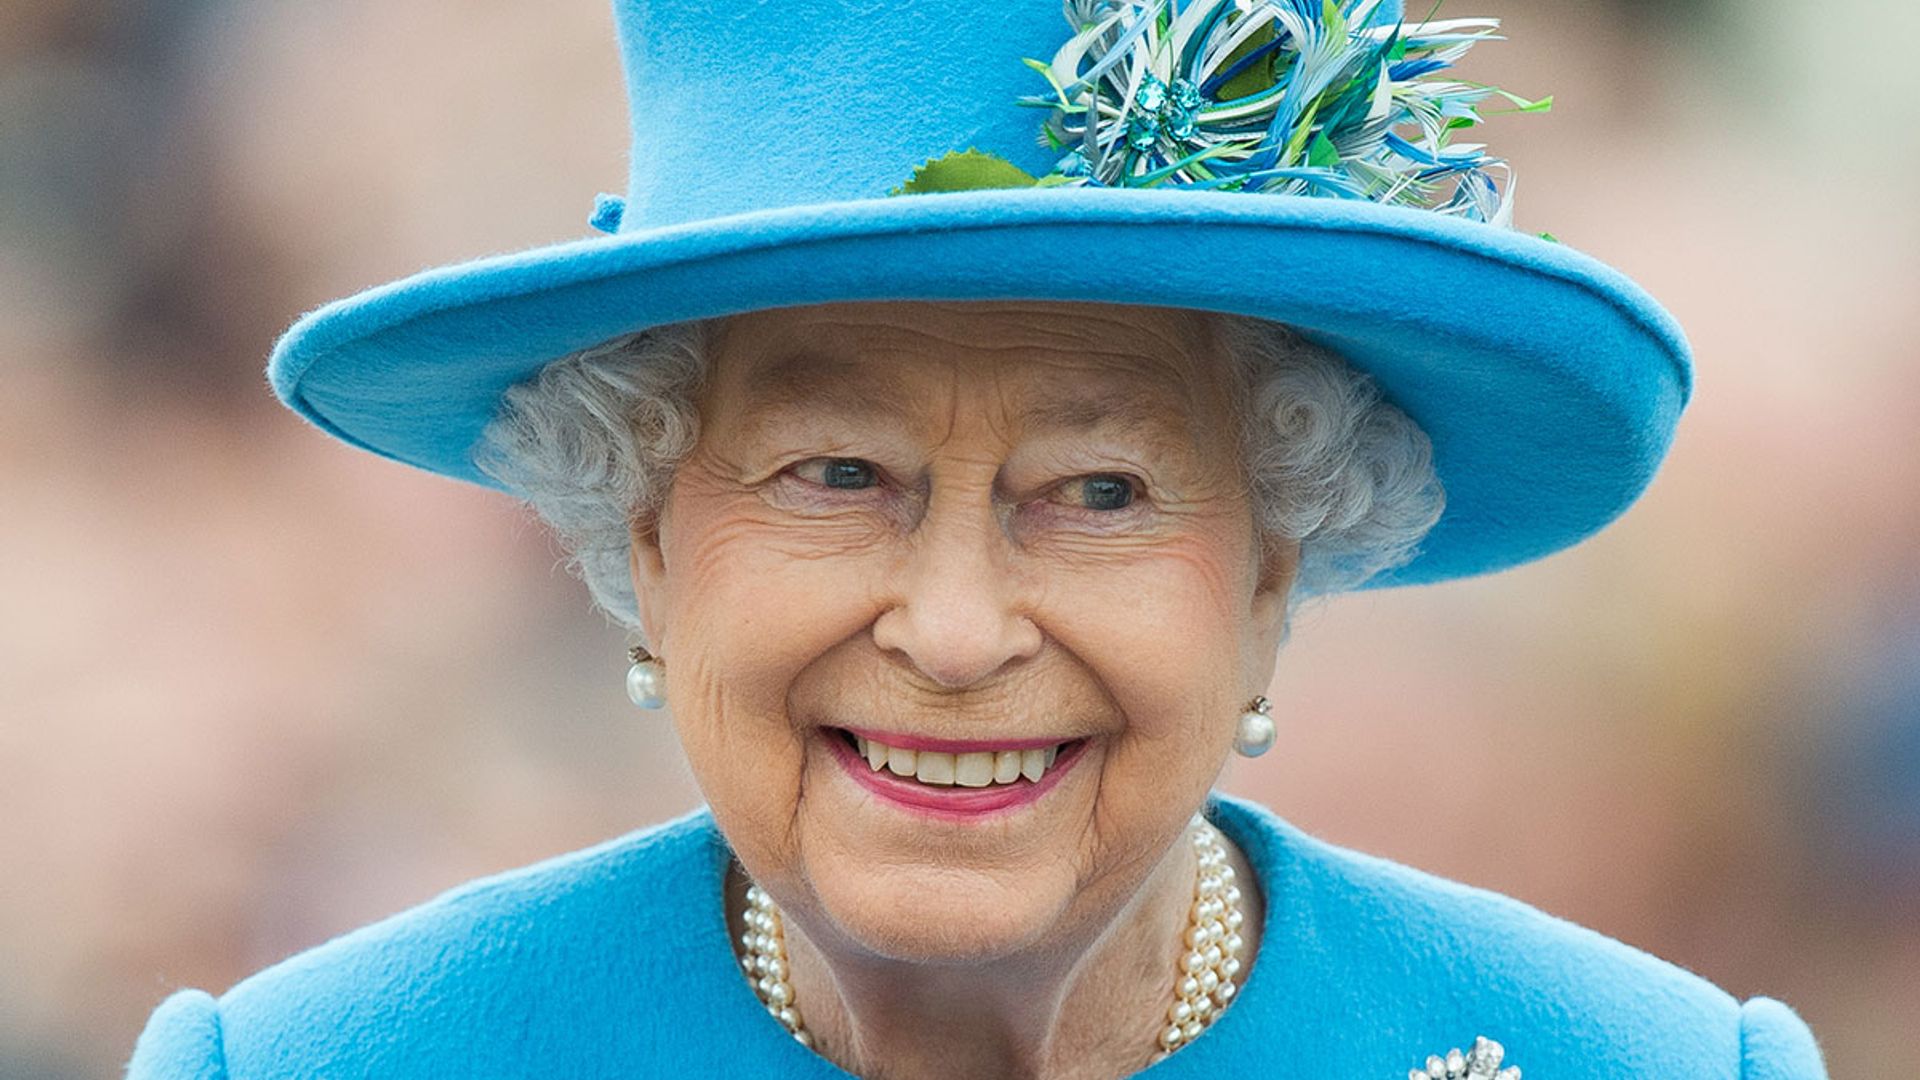 The Queen wears her 18th birthday gift in sentimental new photo